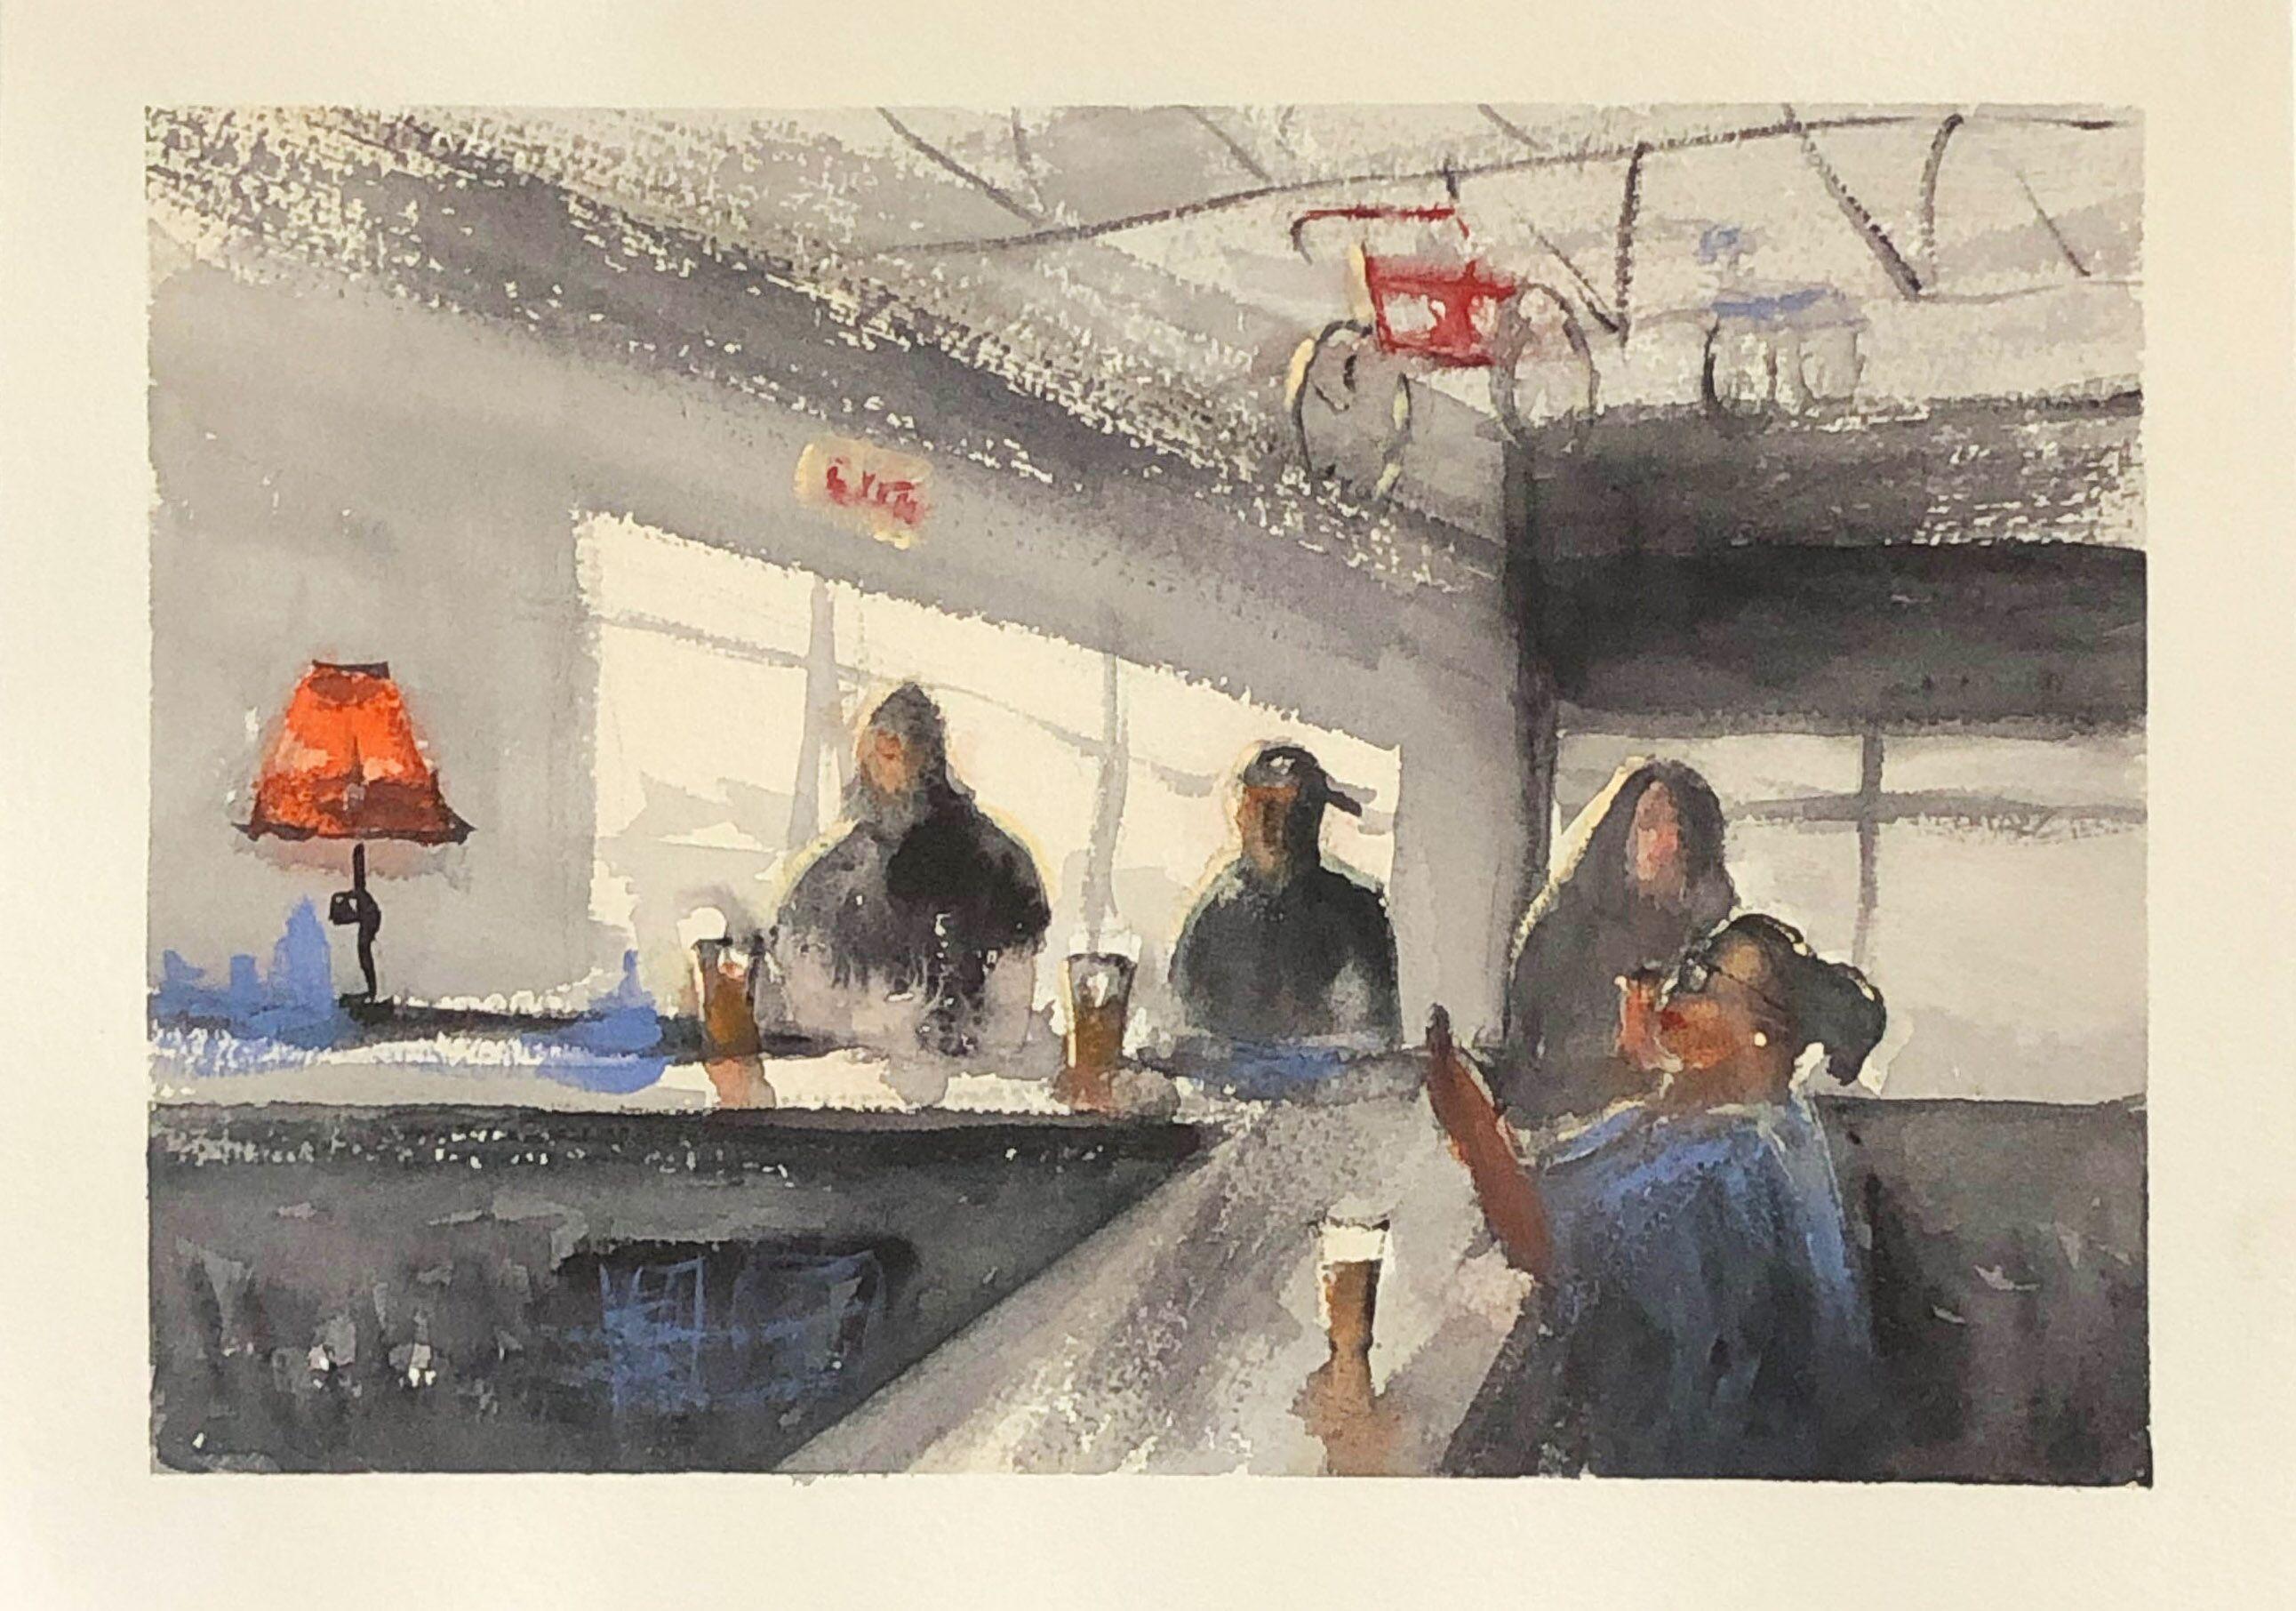 "Wausau Wednesday Night, " Watercolor on Paper Interior by Julia Taylor